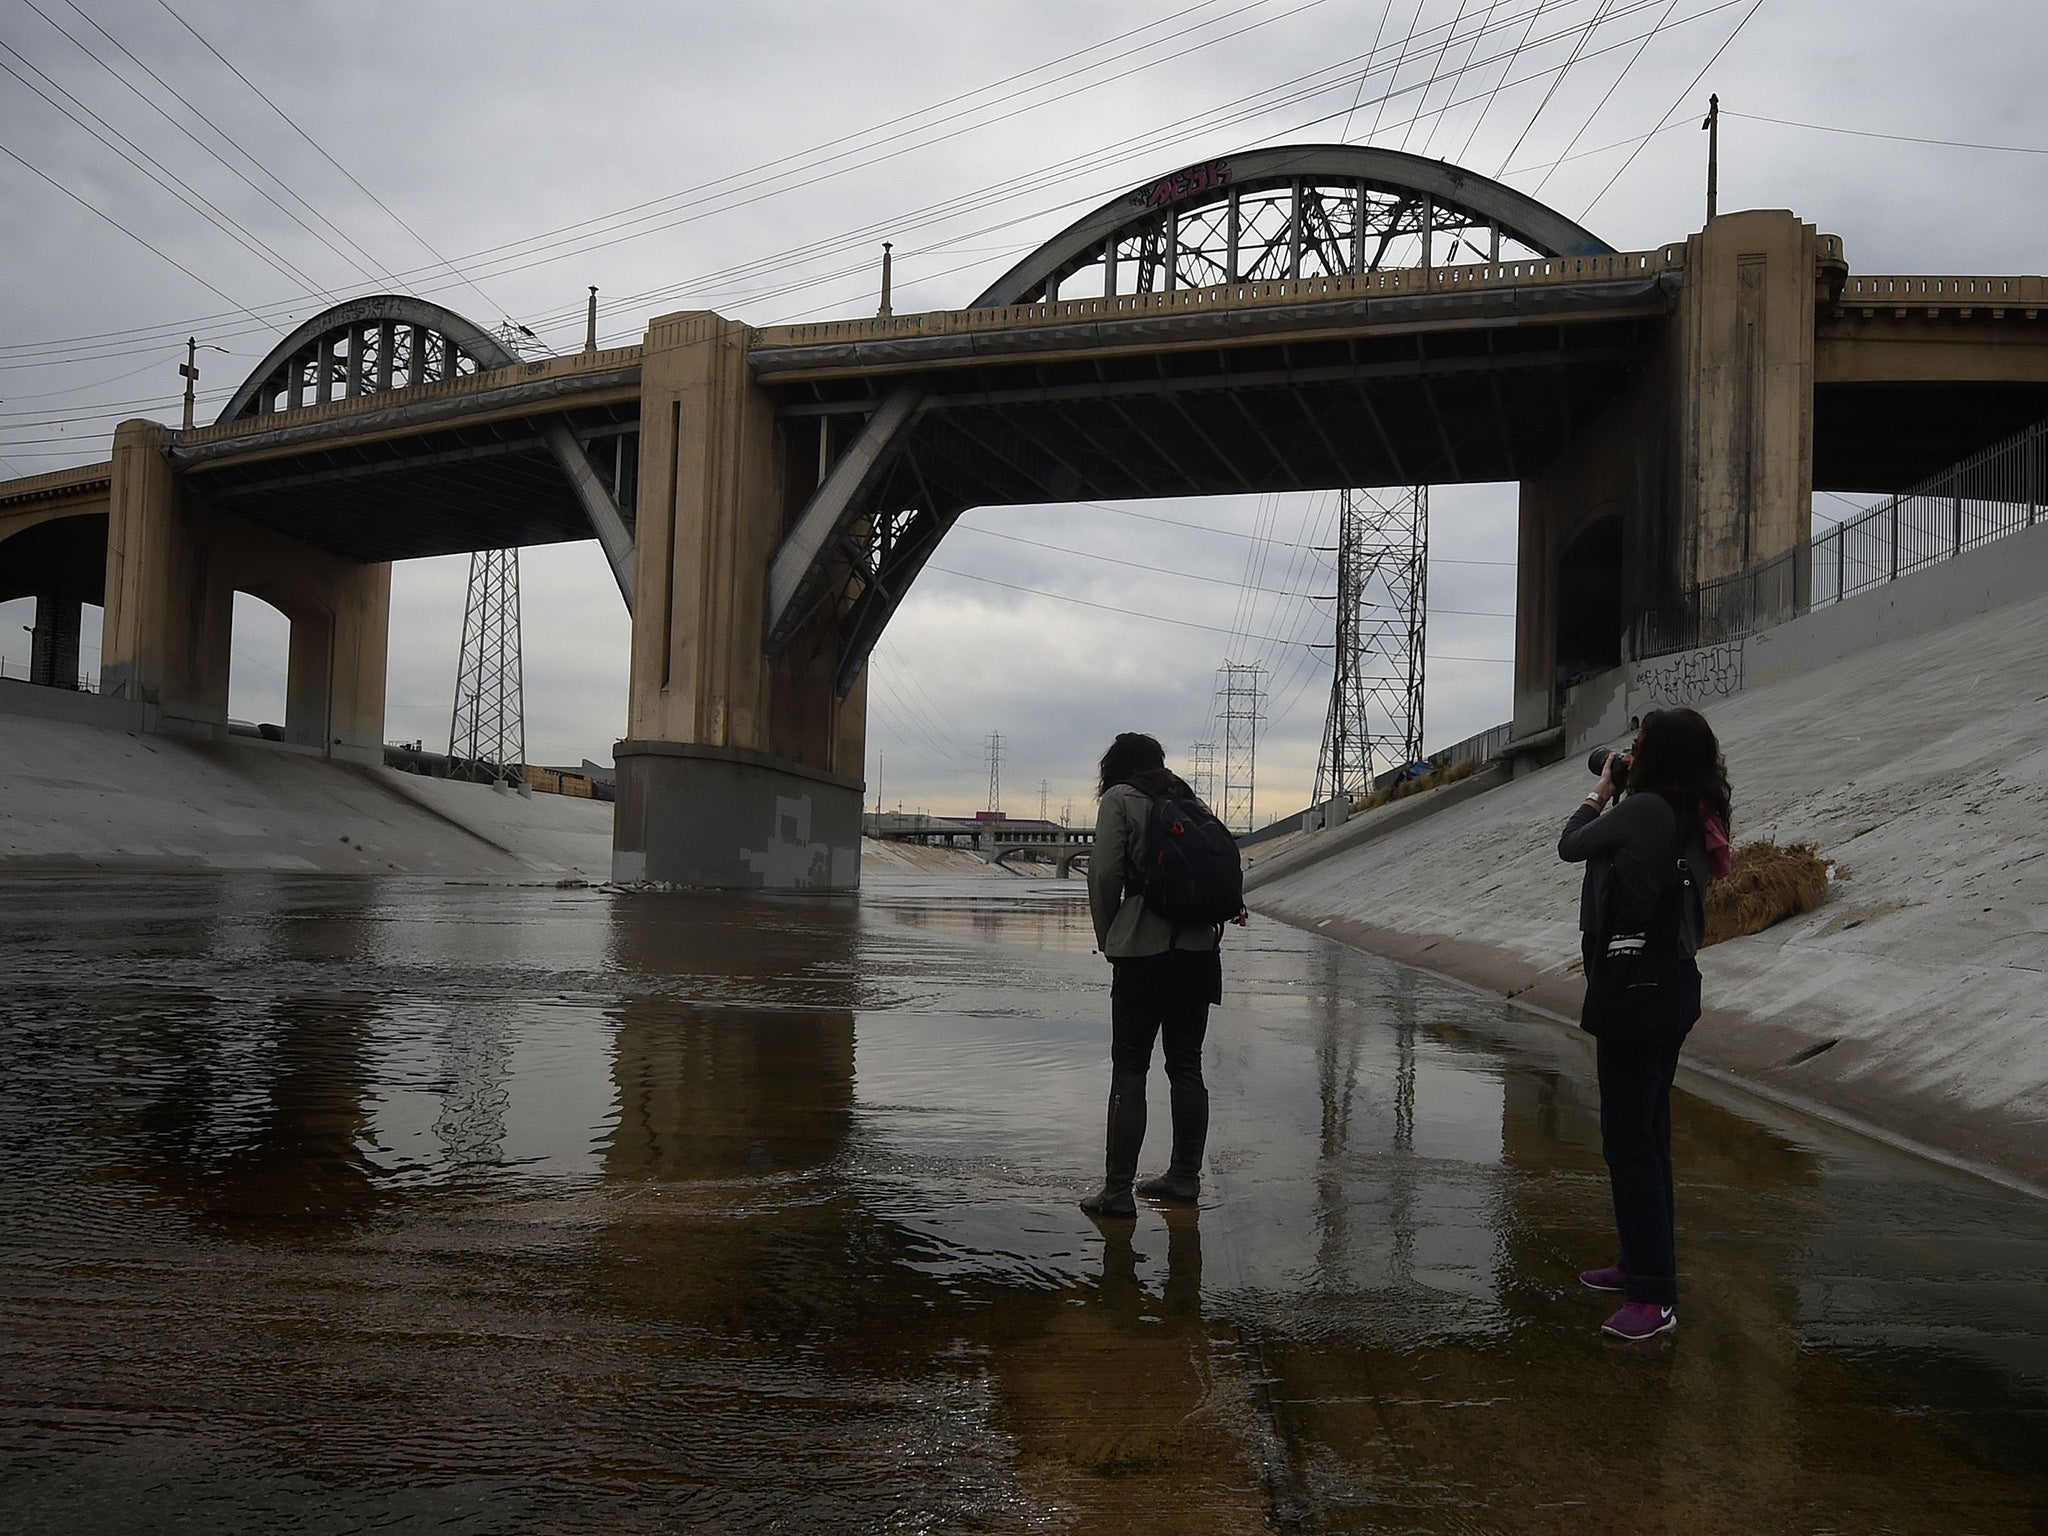 People take photographs as they come to say goodbye to the iconic 6th Street Bridge that connects downtown Los Angeles with its eastern disticts